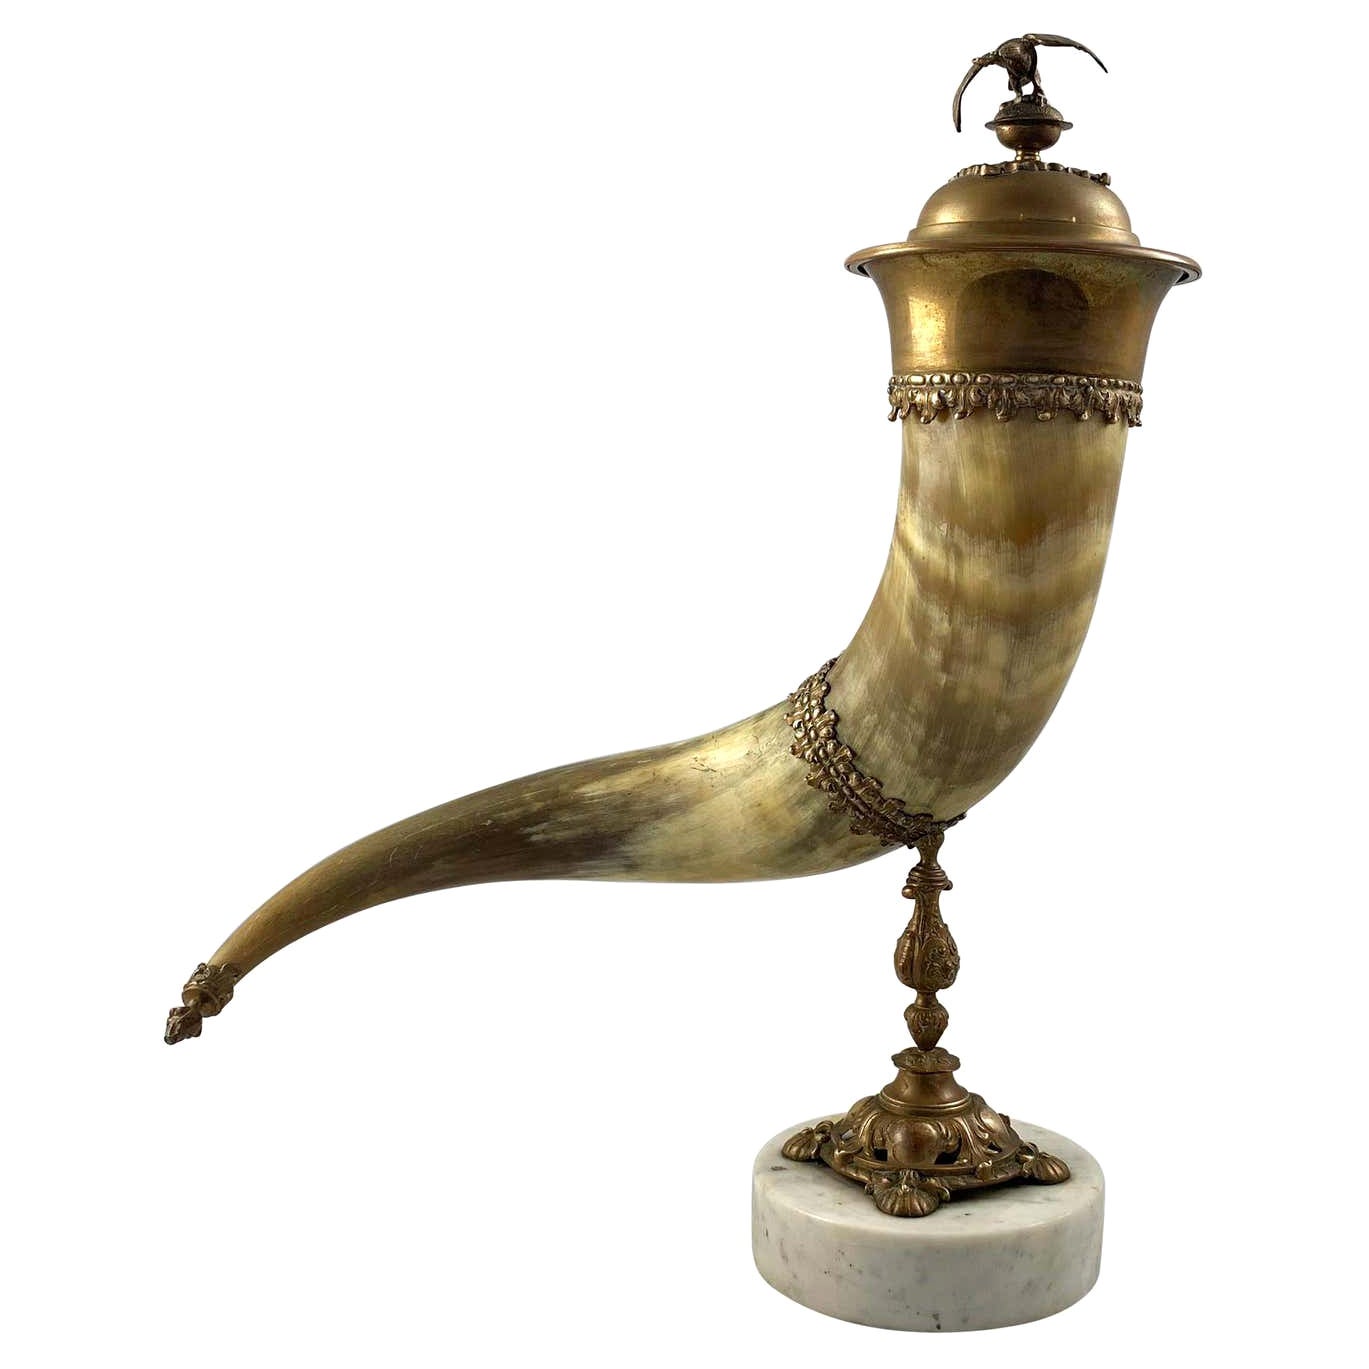 19th Century Horn and Gilt Brass Mounted Cornucopia with Cover